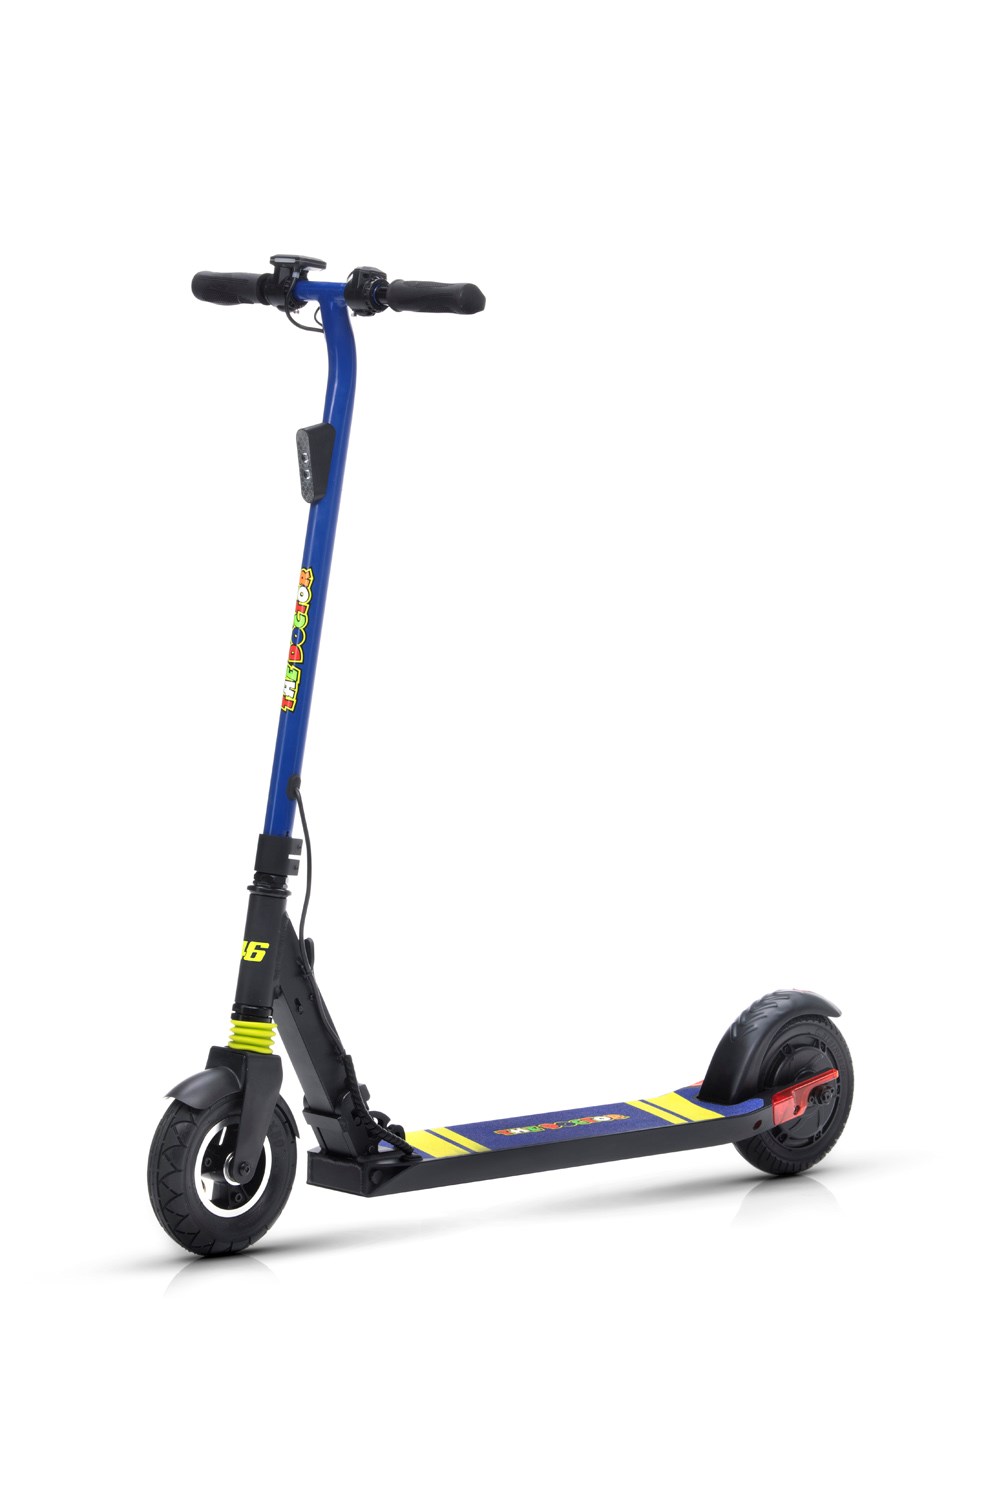 Vr46 Kd1 Electric Scooter -